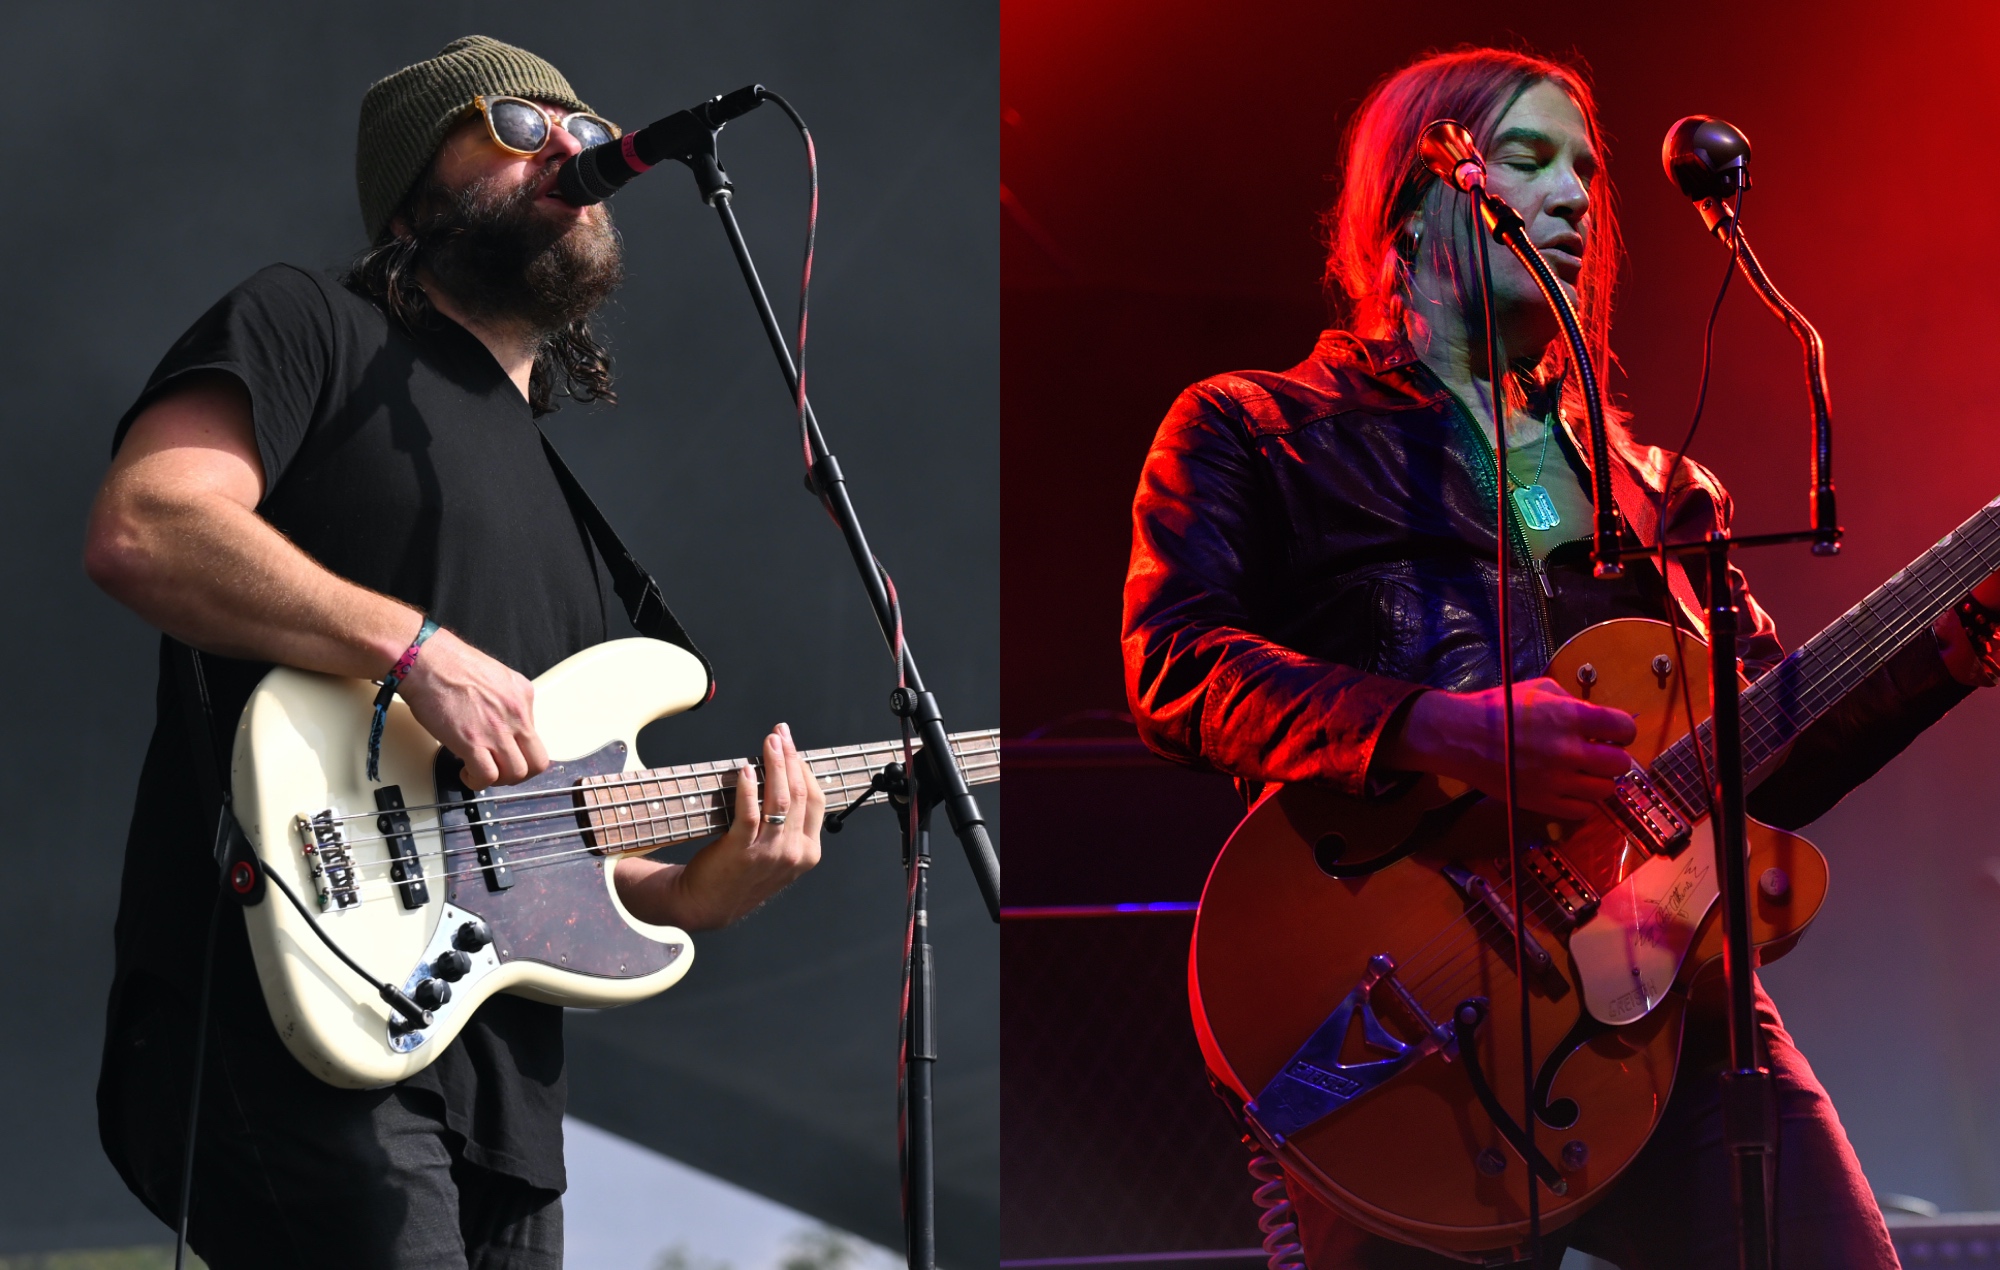 The Dandy Warhols and The Black Angels announce UK and European co-headline tour